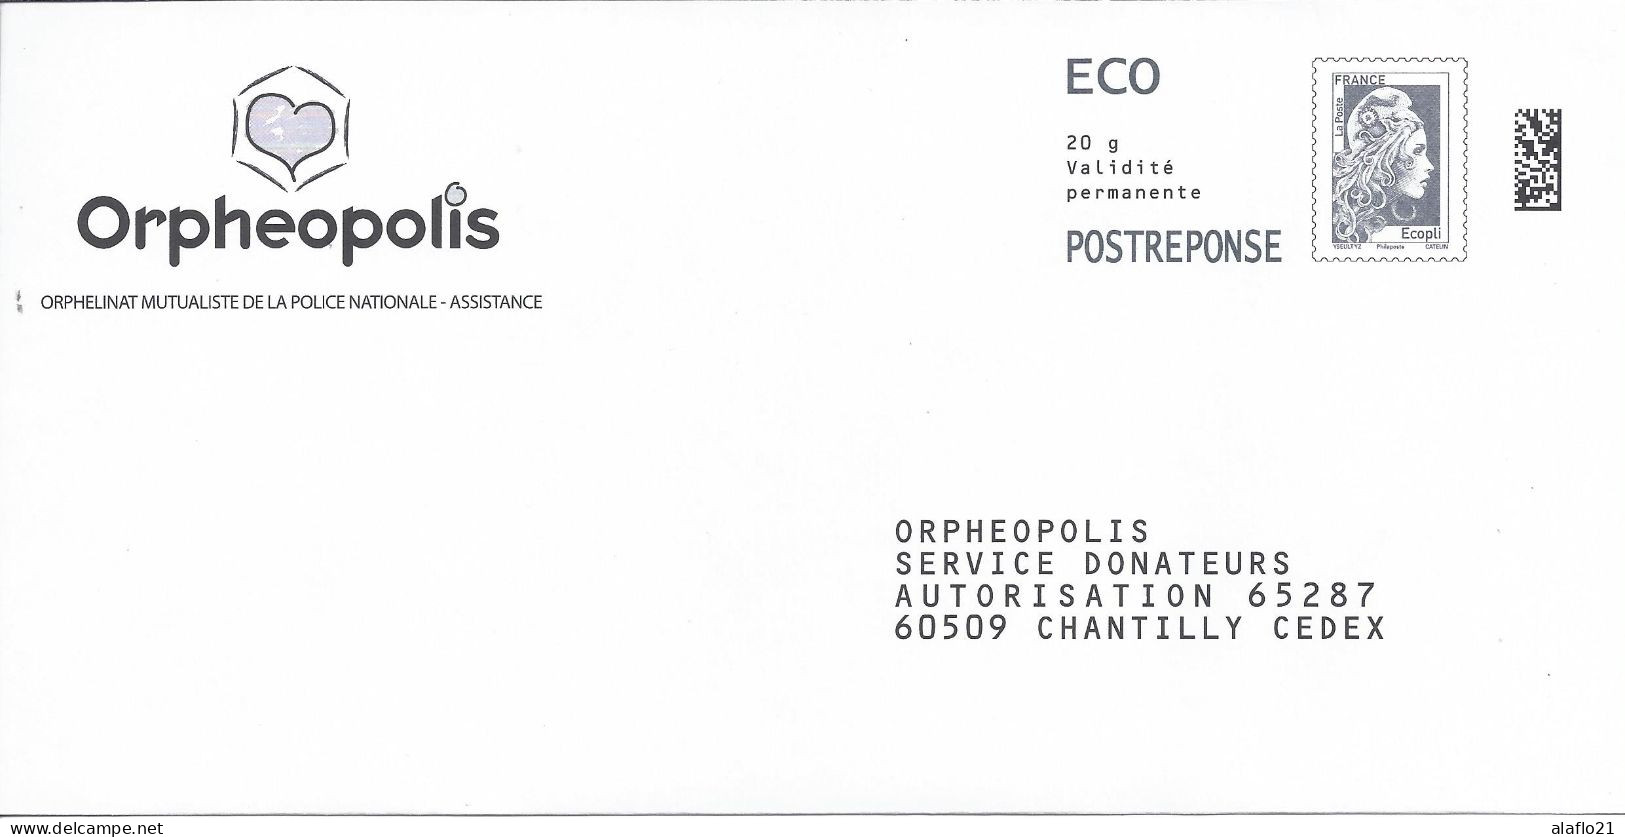 POSTREPONSE ECO - MARIANNE D'YZ - ORPHEOPOLIS - Lot 355516 - PAP: Antwort